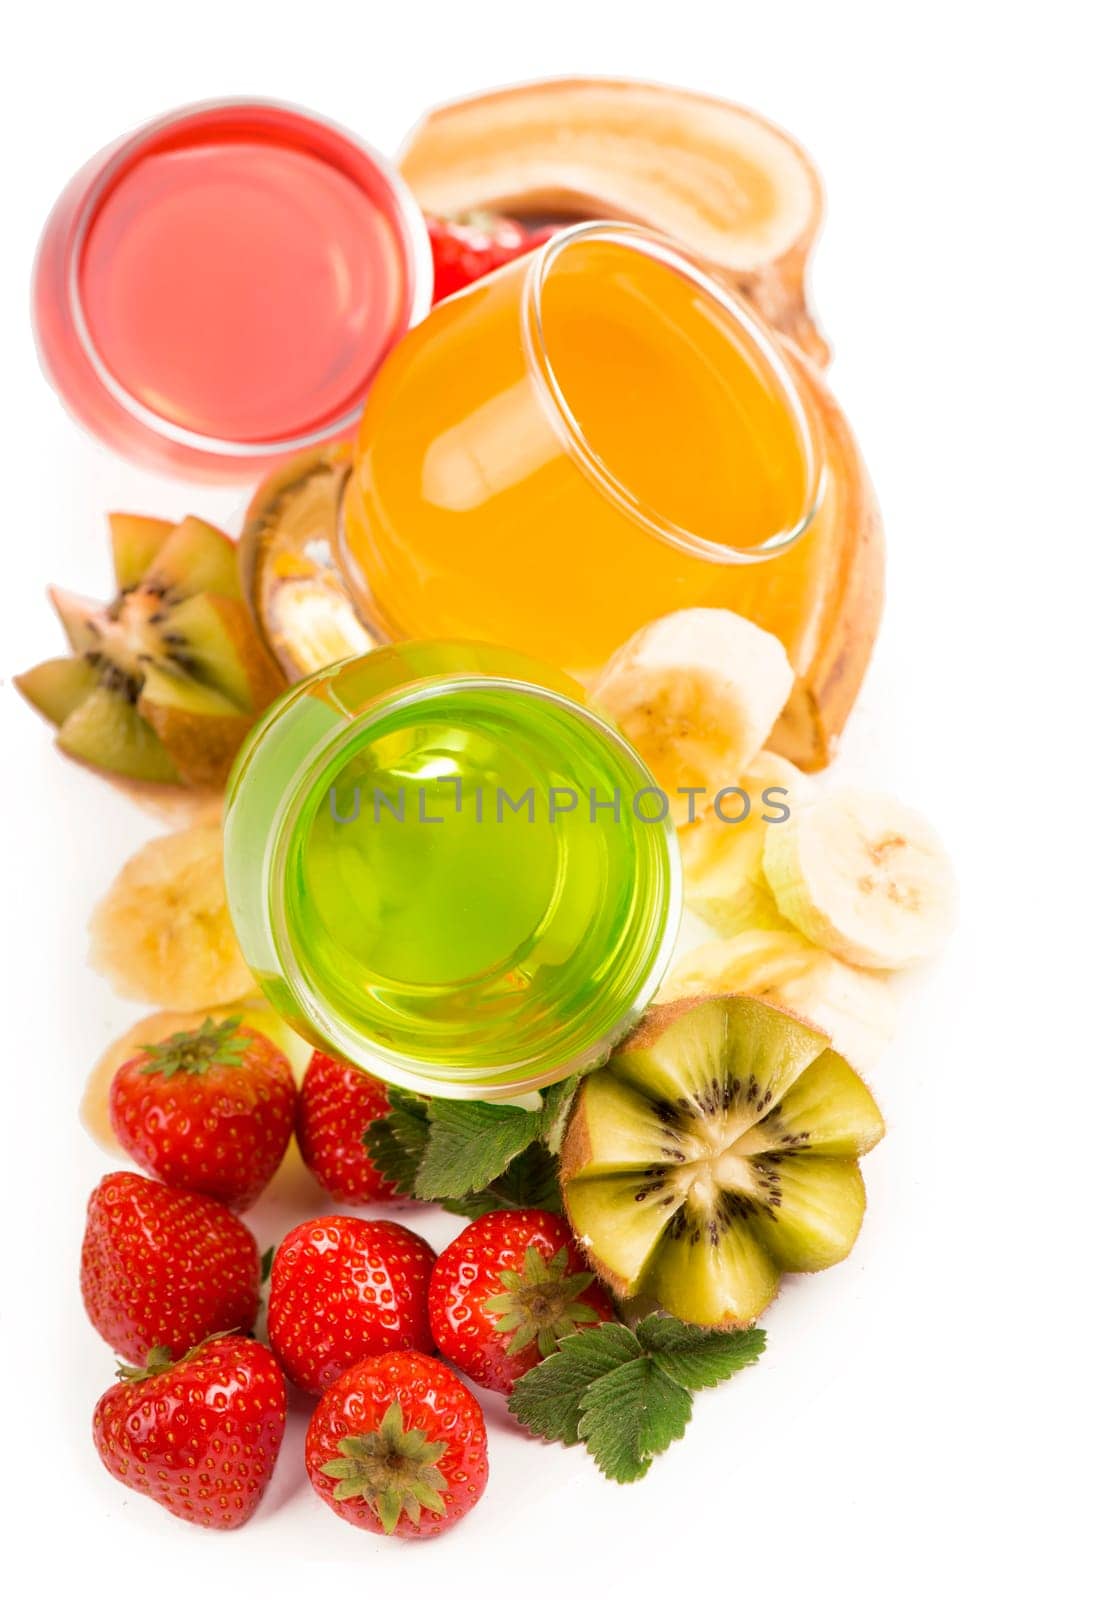 banana , kiwi and strawberry jelly in glasses with fresh berries and fruits on a white background by aprilphoto